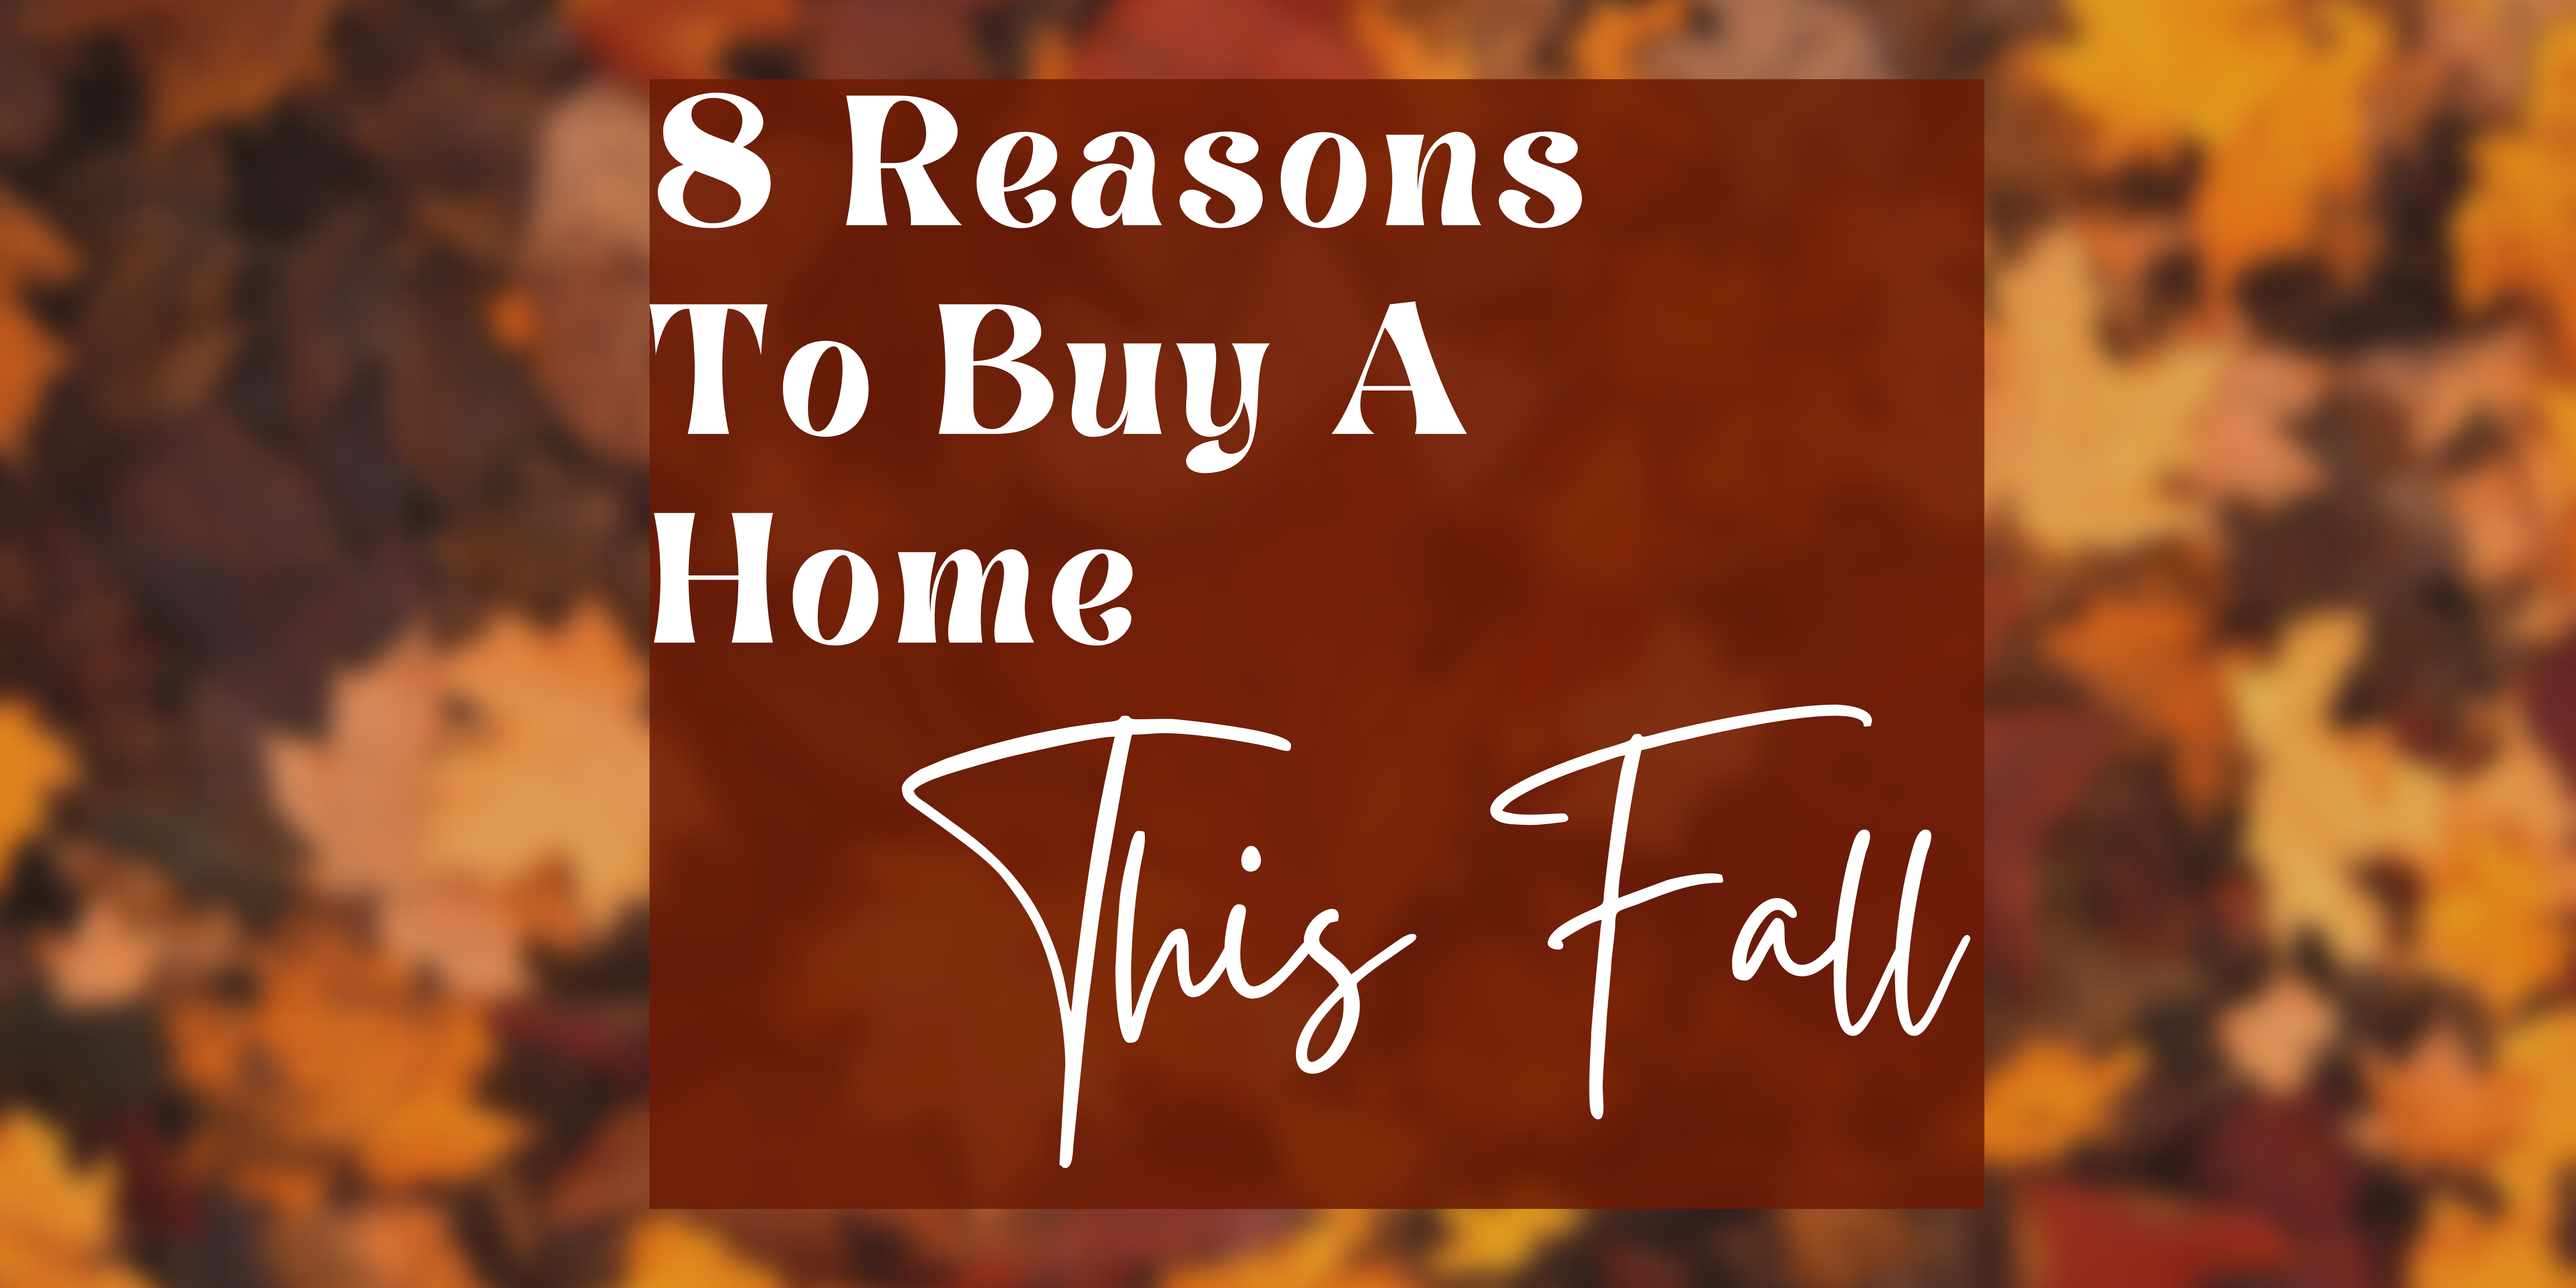 8 reasons to buy a home this fall